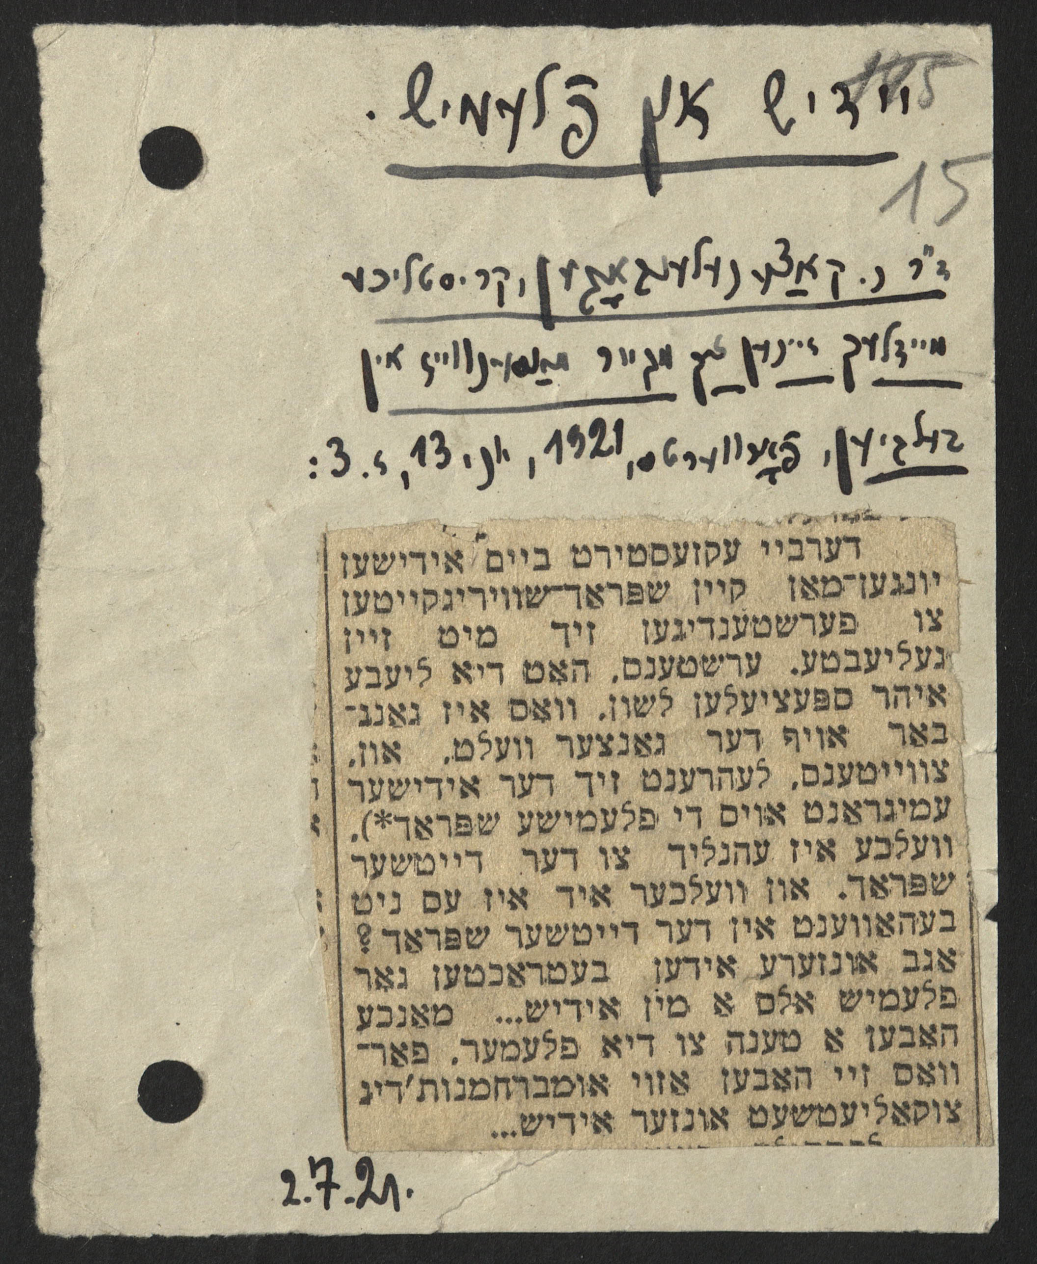 Flemish and Yiddish, YIVO Institute for Jewish Research